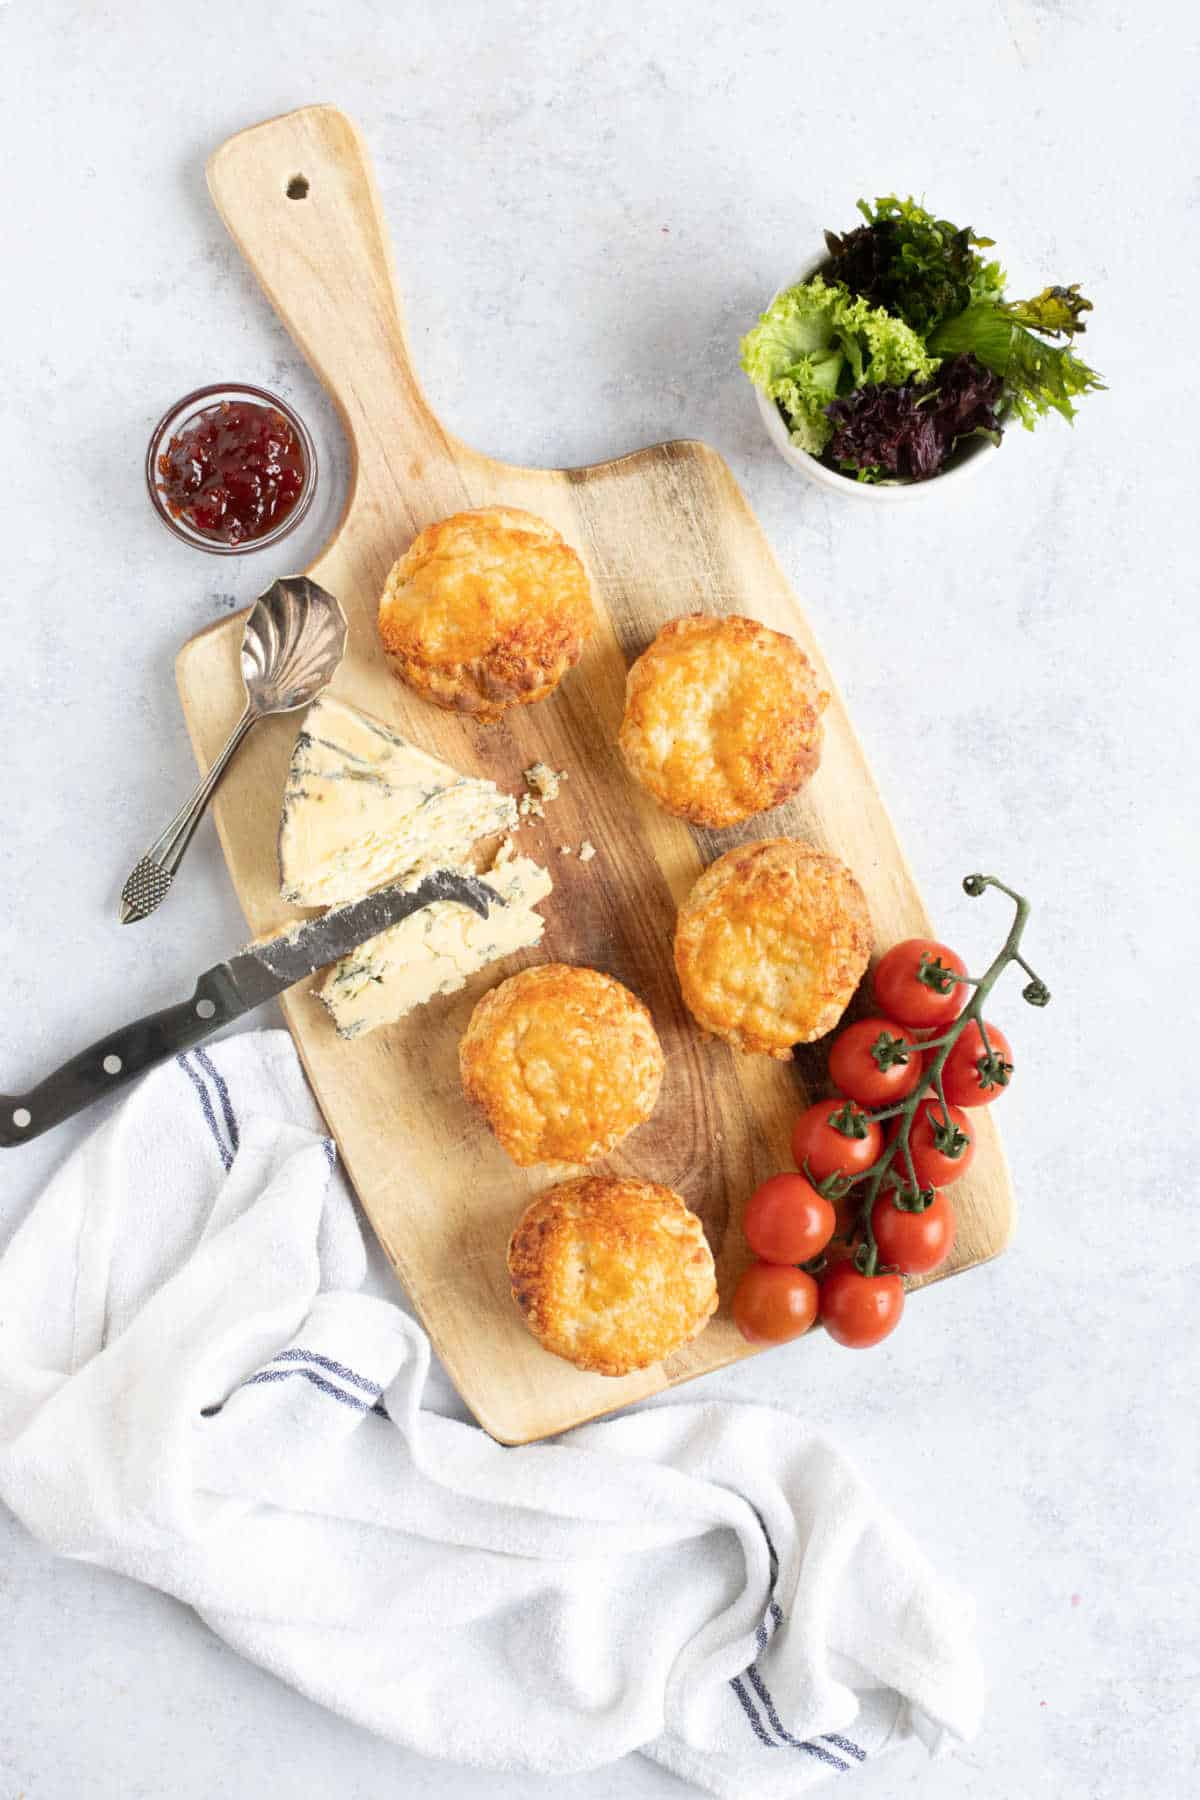 Cheese scones on a wooden board with cherry tomatoes and chutney.